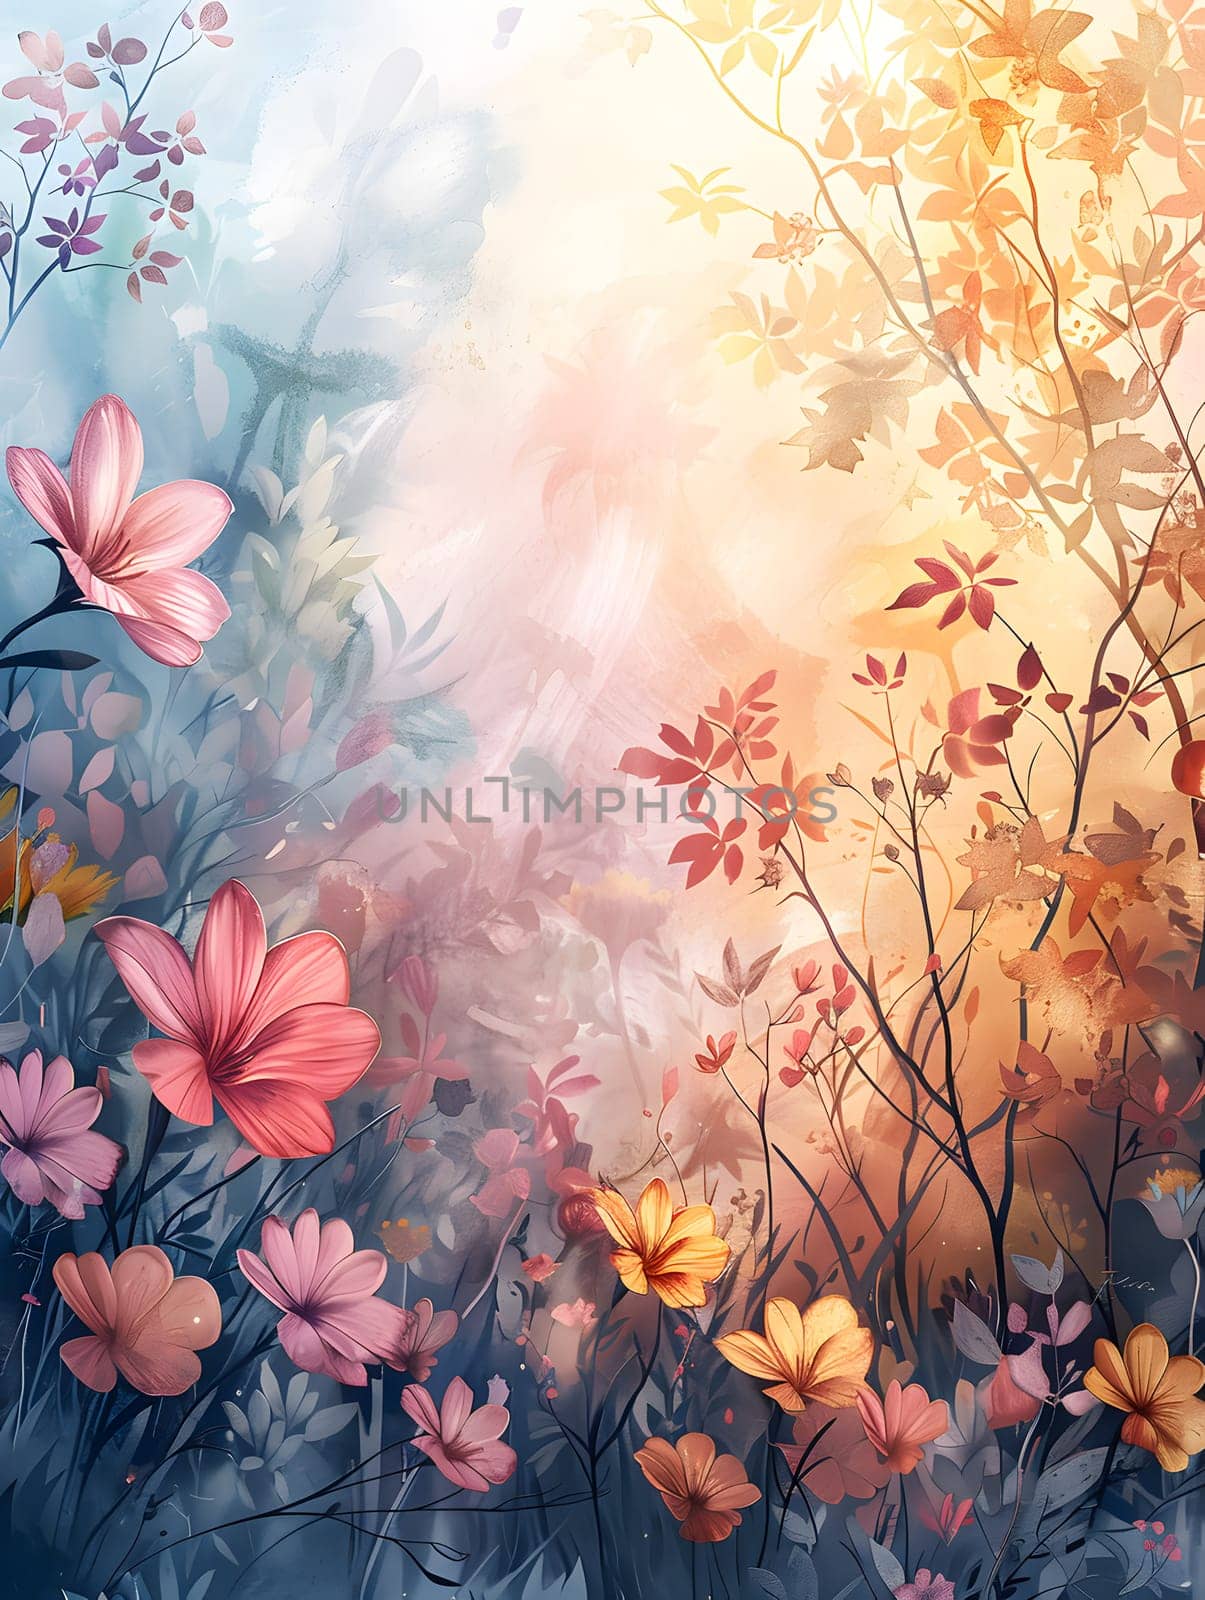 A beautiful painting of a field of flowers under the sunlight, with the sun shining through the leaves and reflecting off the delicate petals, creating a serene natural landscape